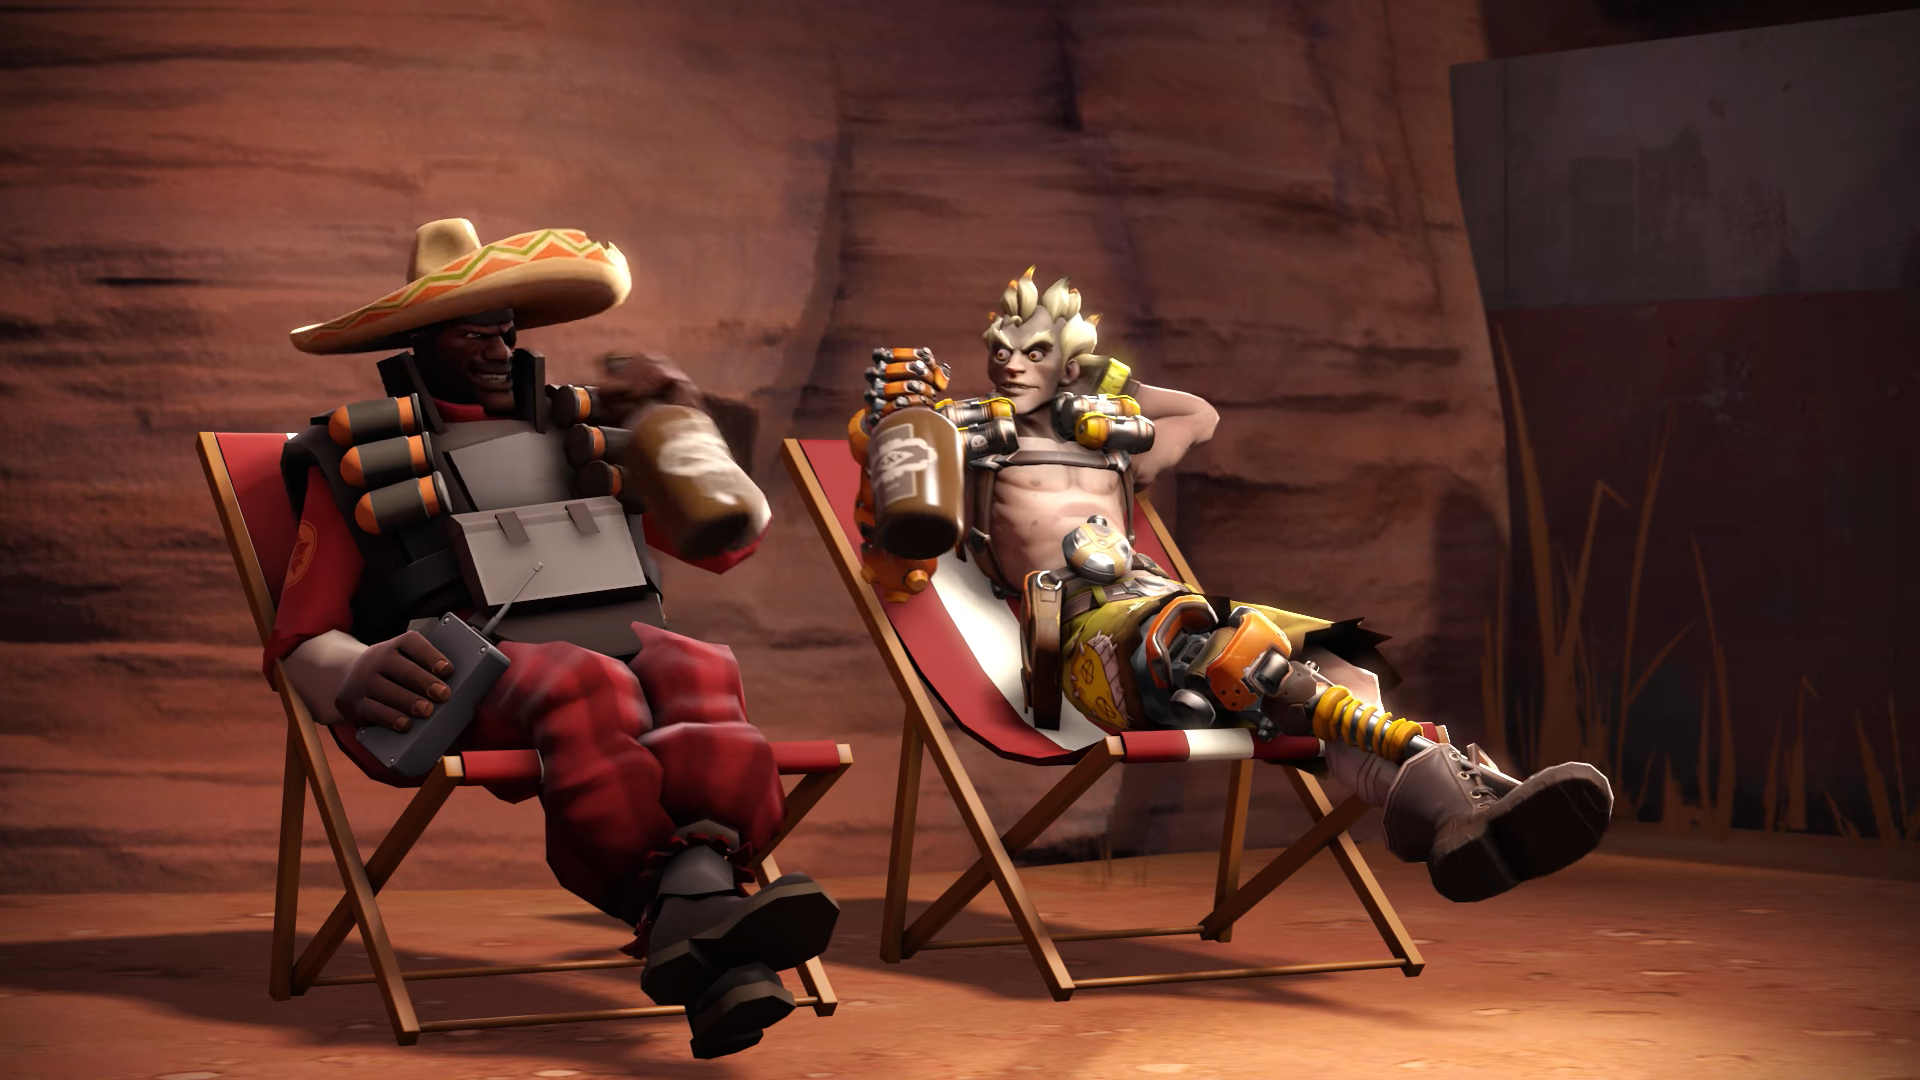 This Overwatch vs. Team Fortress 2 crossover is the coolest thing we’ve see...